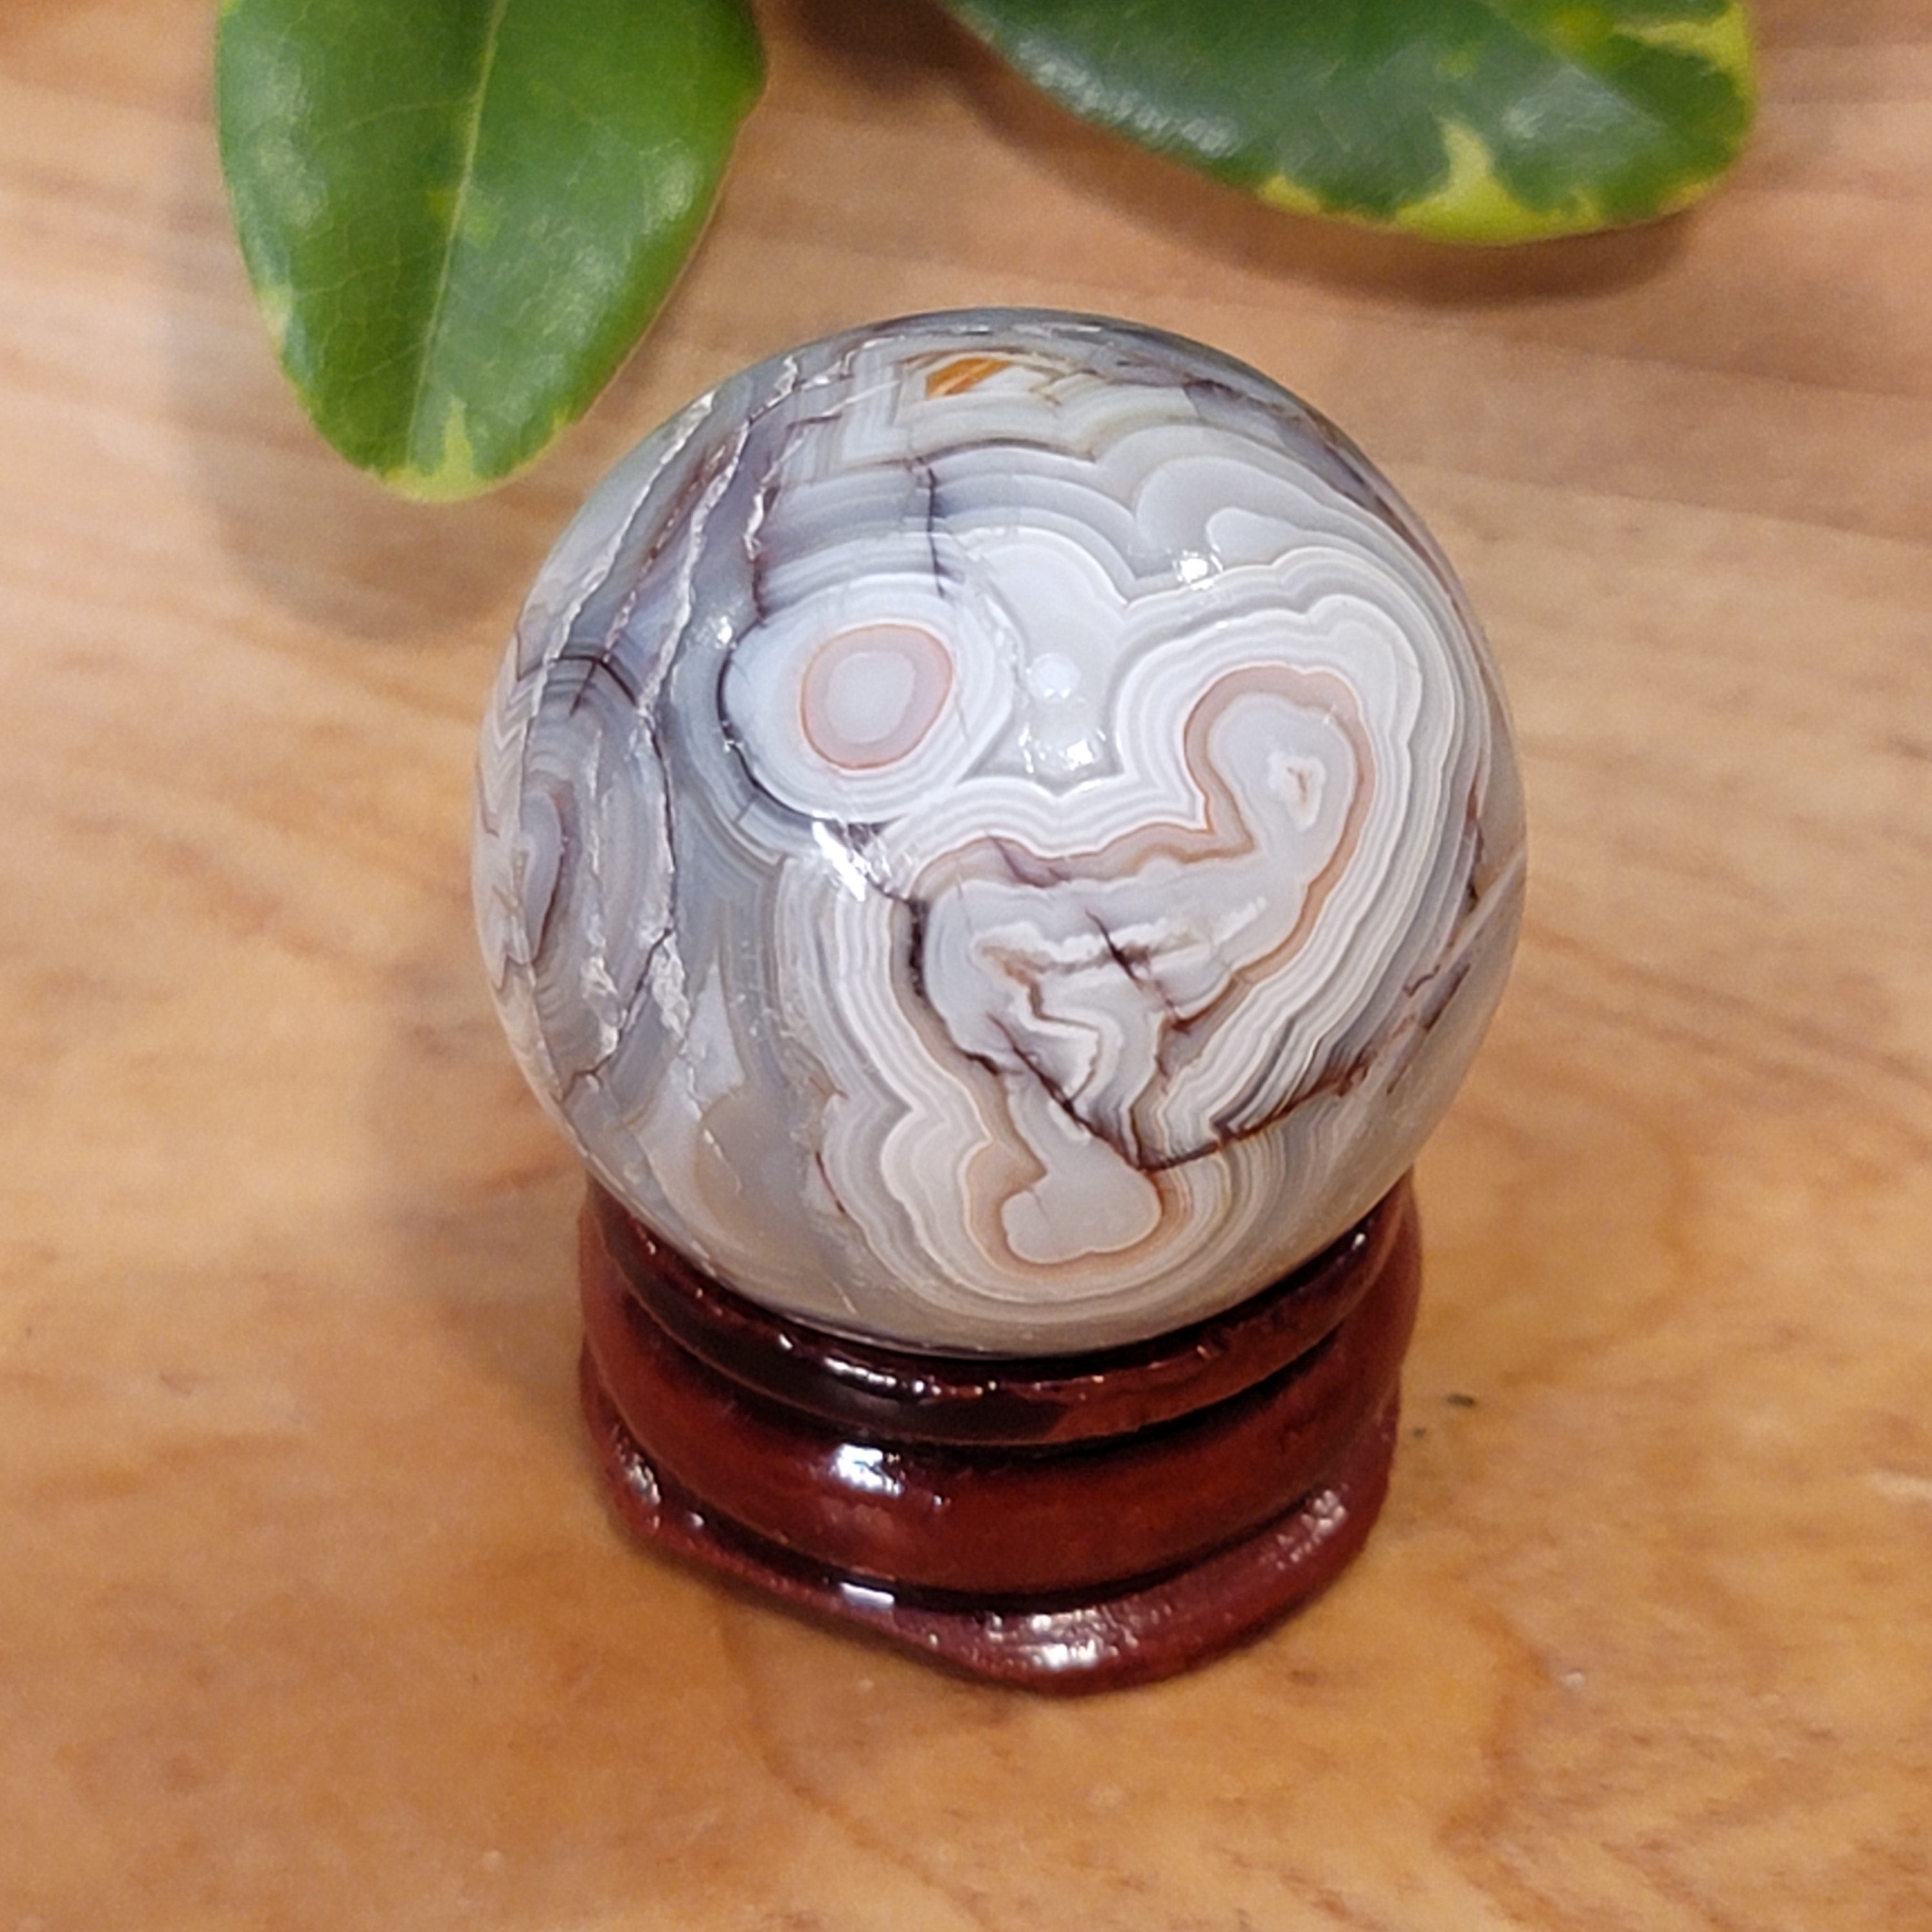 Crazy Lace Agate Sphere for Creativity, Joy and Optimism